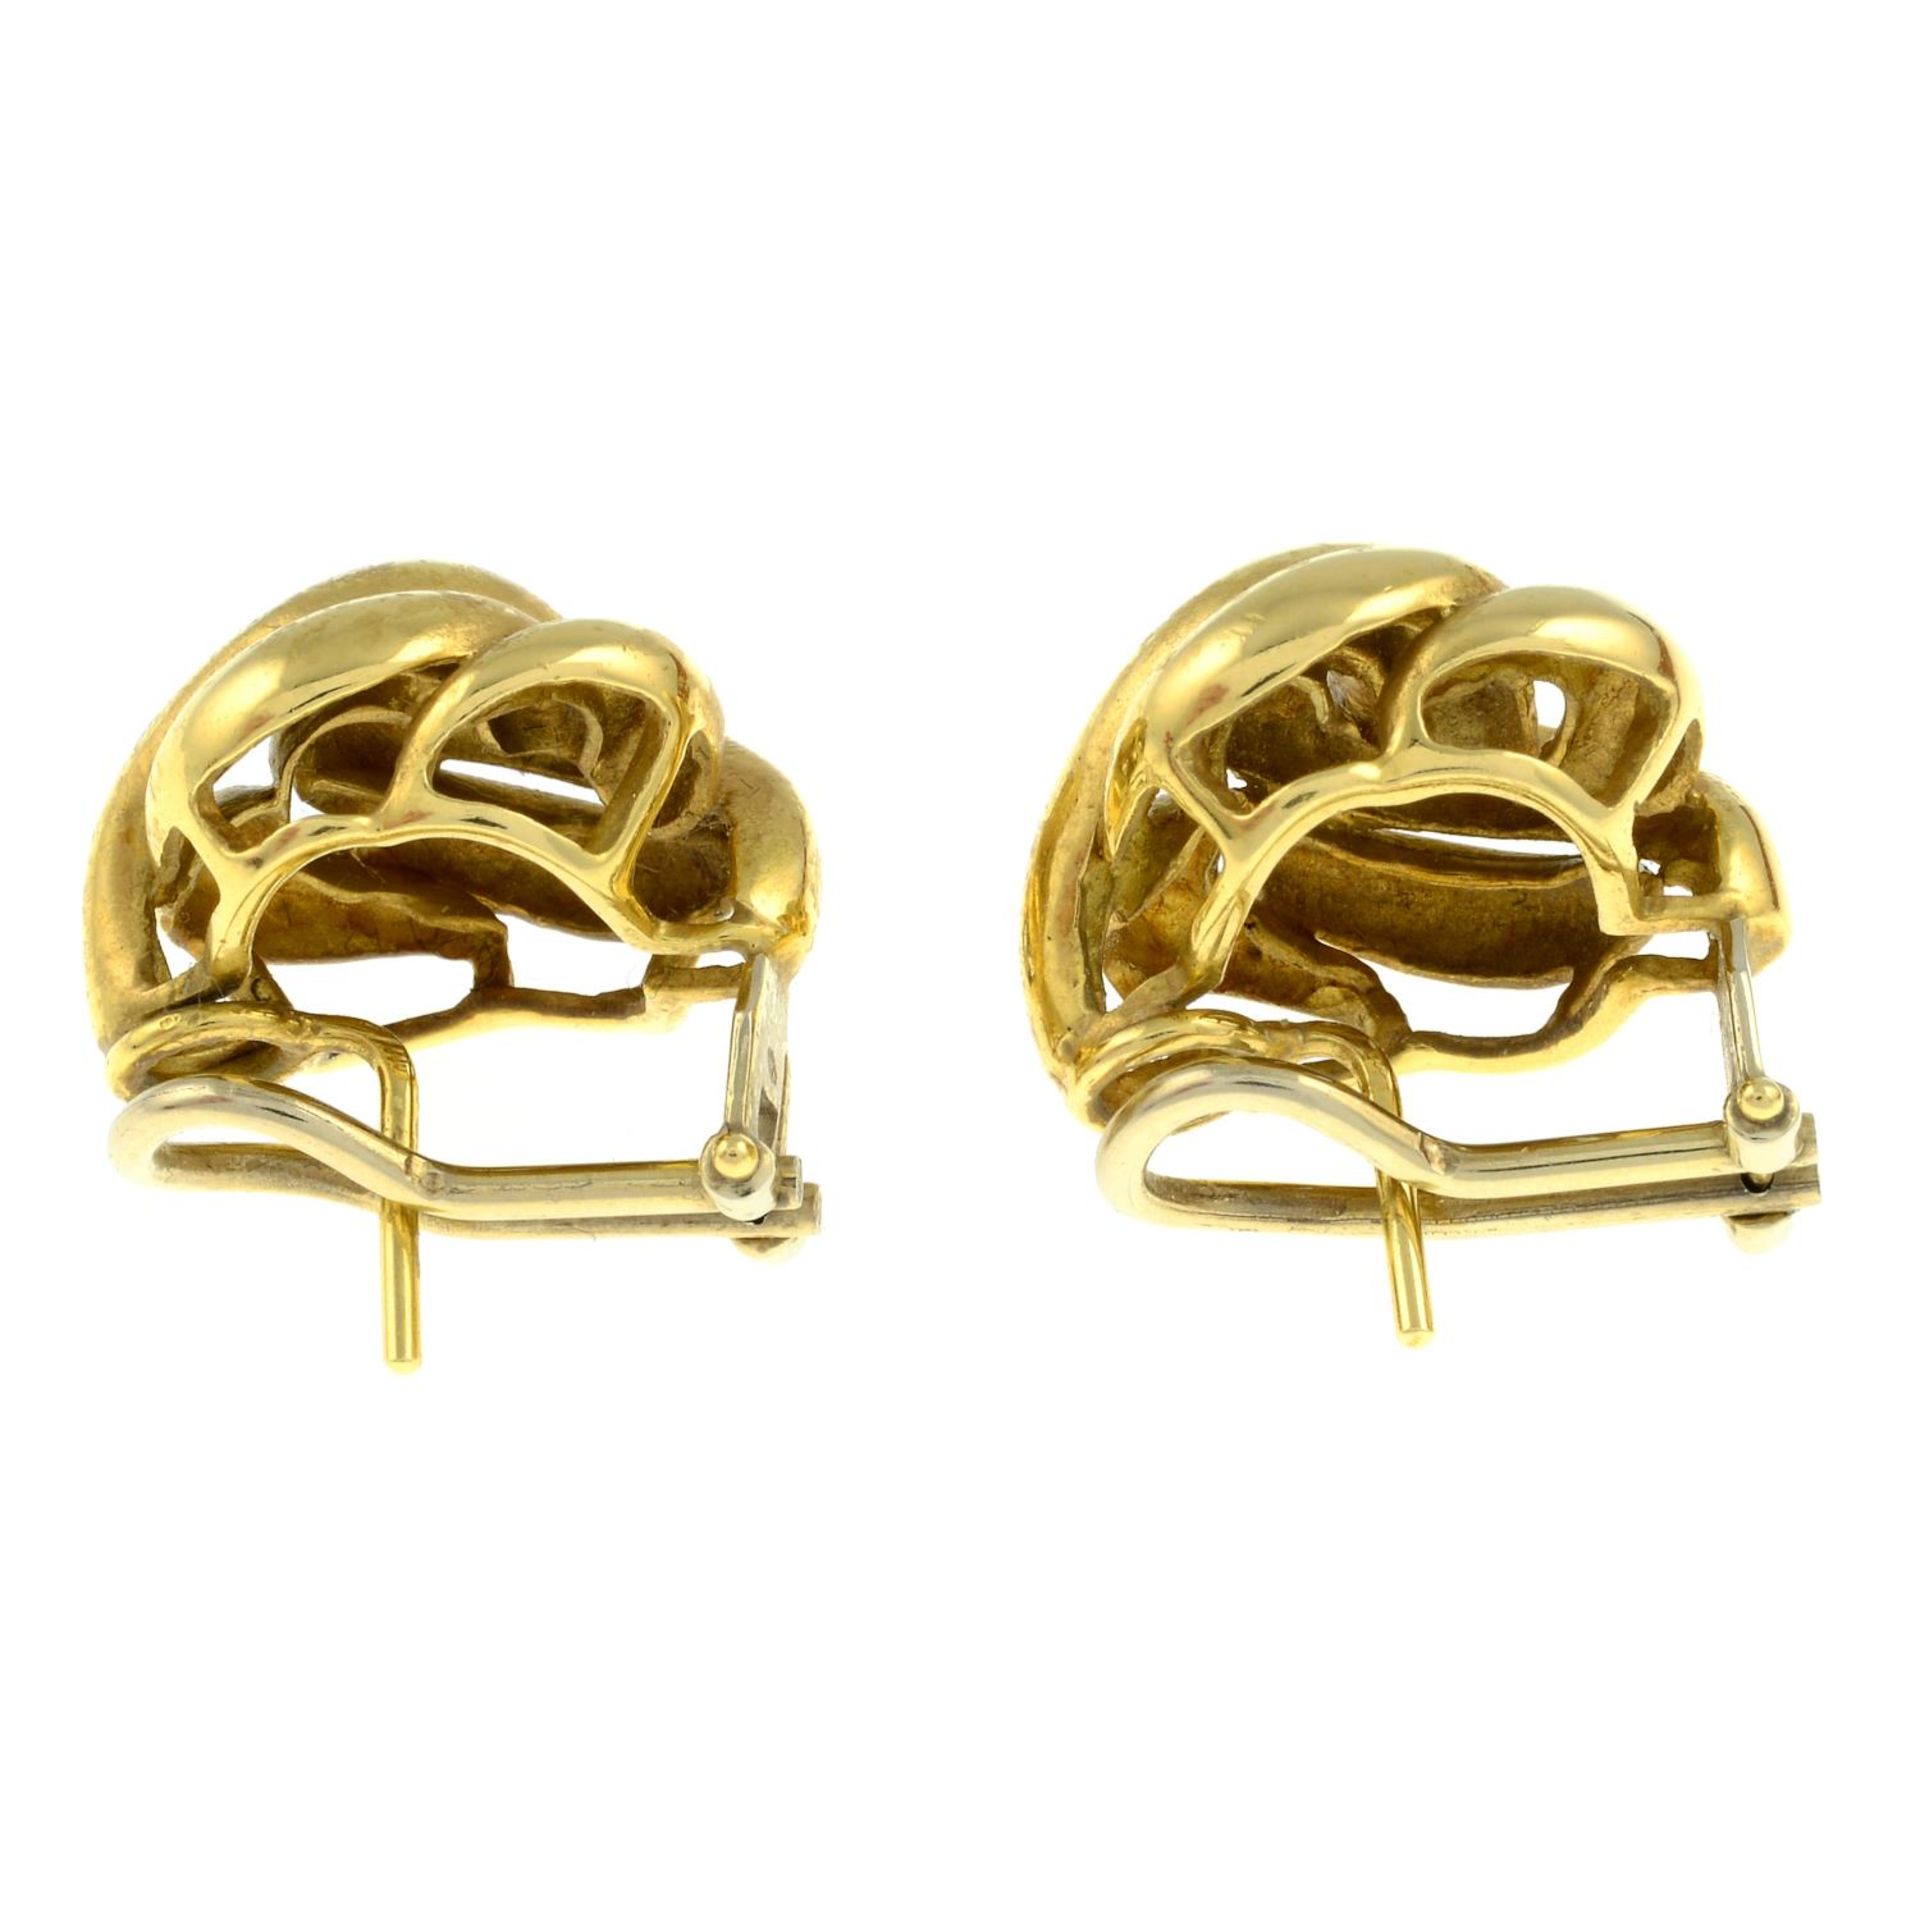 A pair of 18ct gold knot earrings.Import marks for Sheffield, 1990.Length 2cms. - Image 2 of 2